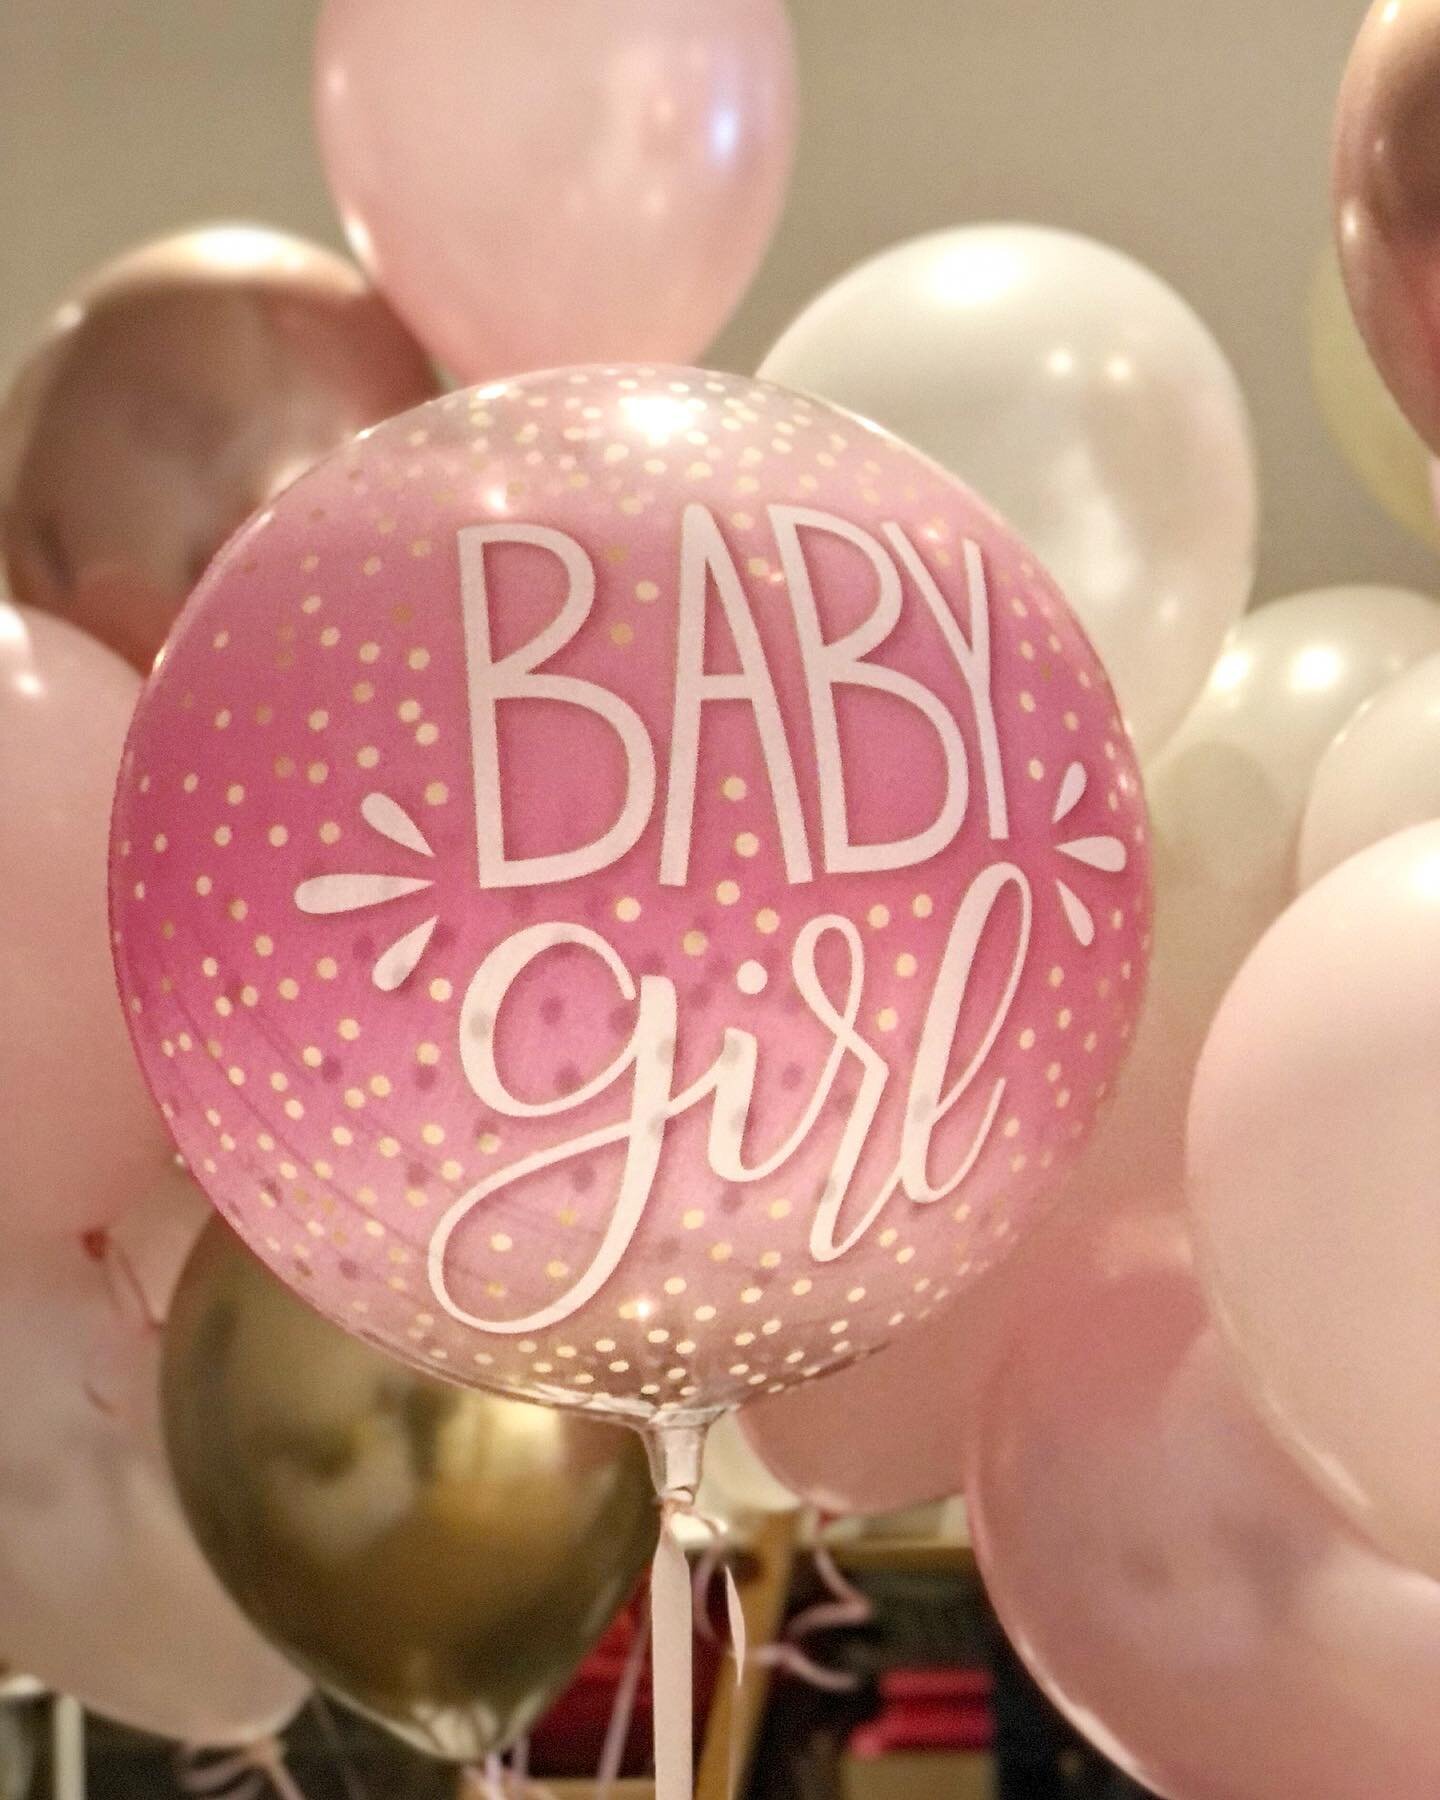 Sweet baby girl you are already surrounded by so much love! Gorgeous balloons featuring our Sweet Darling Balloon Mix and long lasting Baby Girl Bubble Balloon we created recently for a client celebrating the upcoming arrival of their first born baby